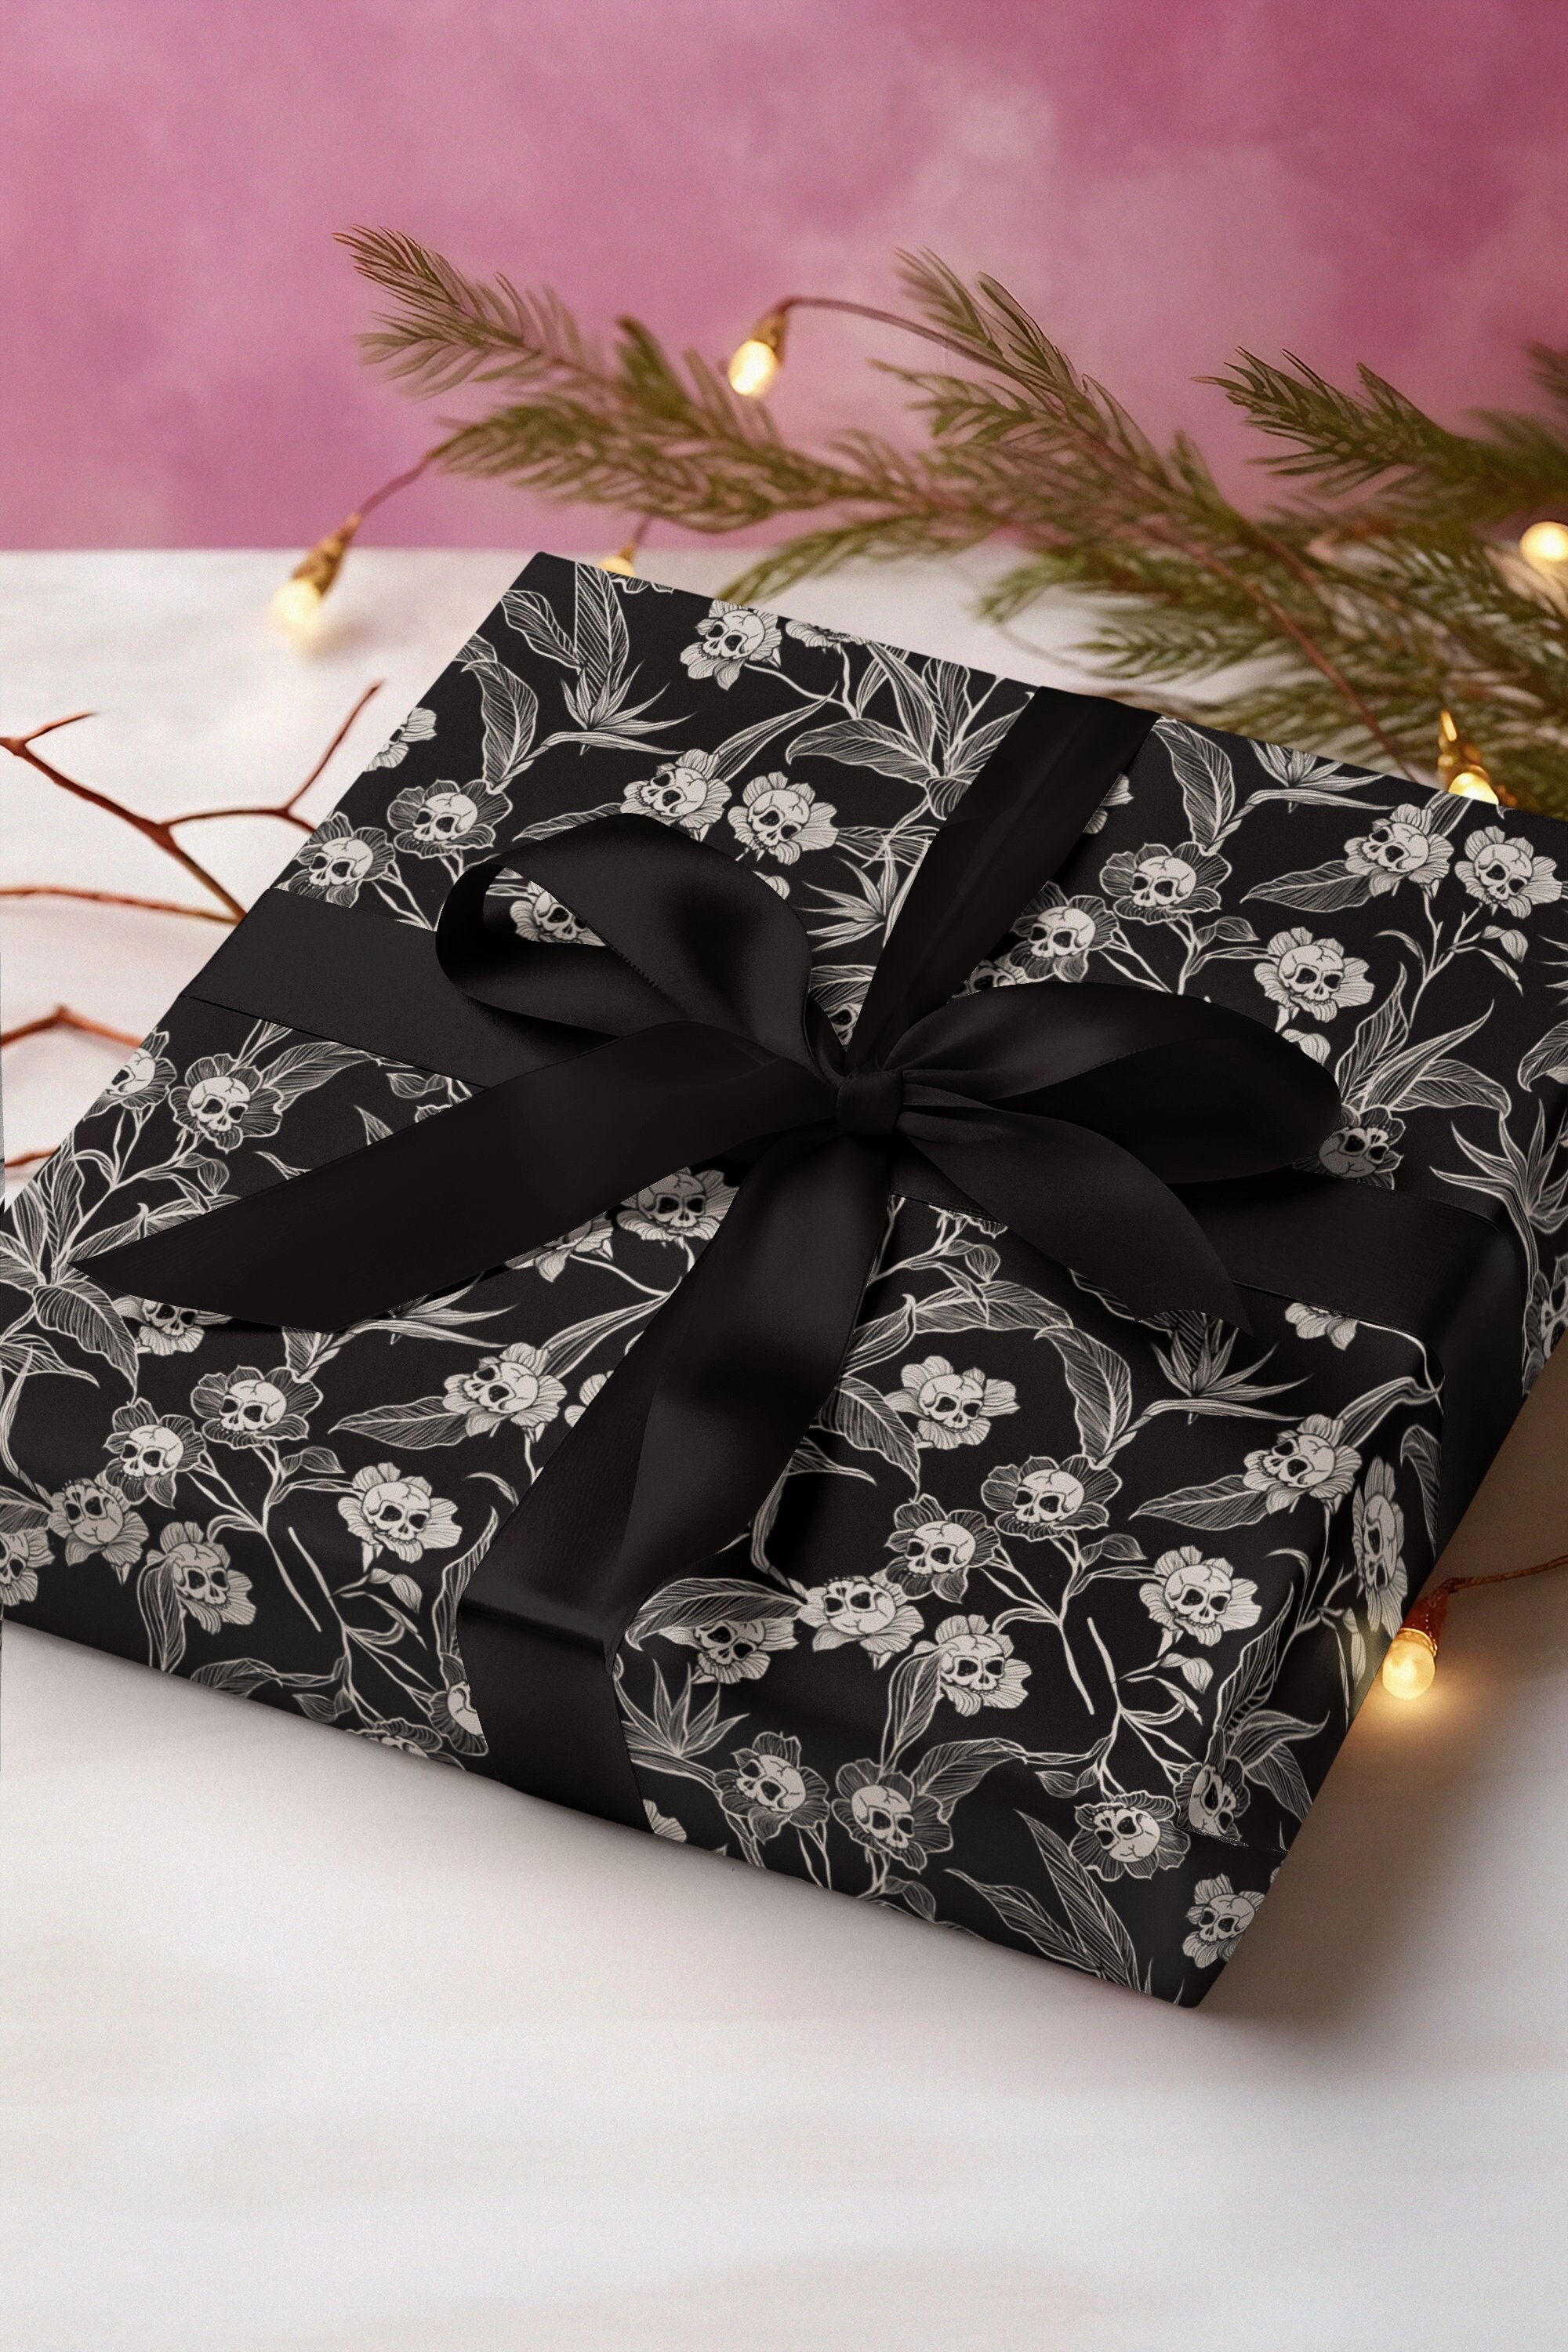 Goth Black Wrapping Paper with Purple Snowflakes